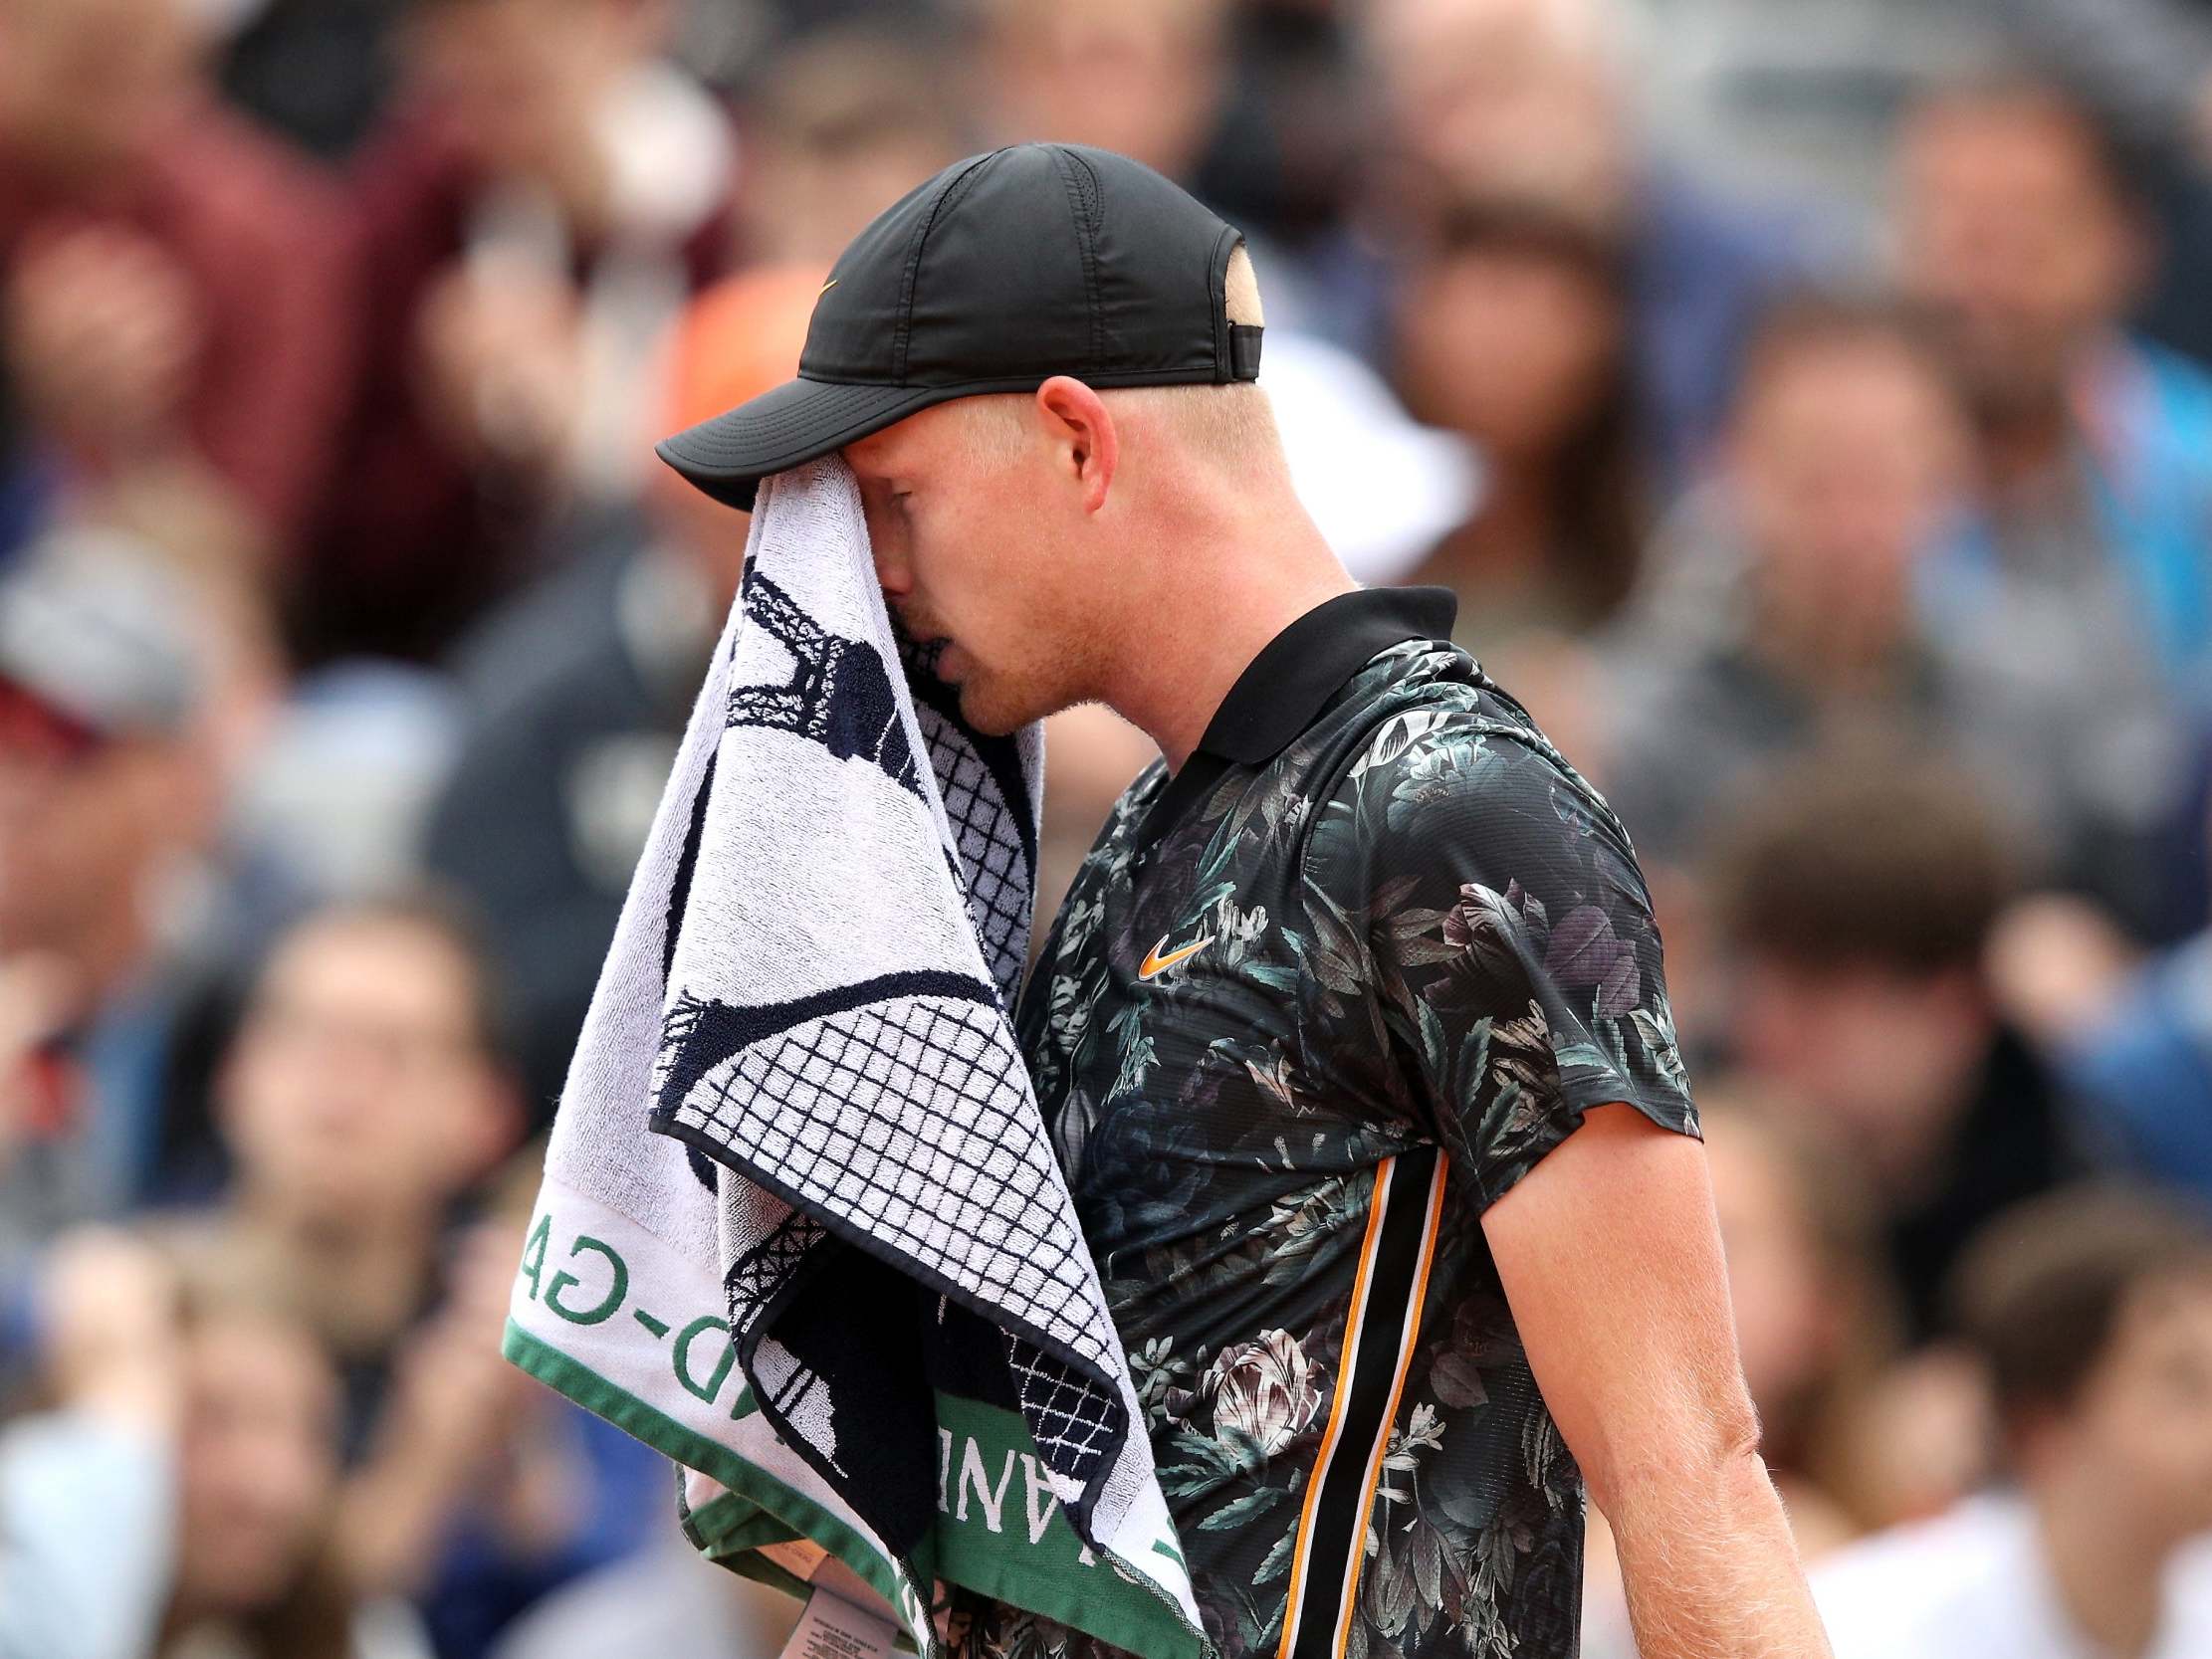 Edmund suffered a second-round exit at the French Open